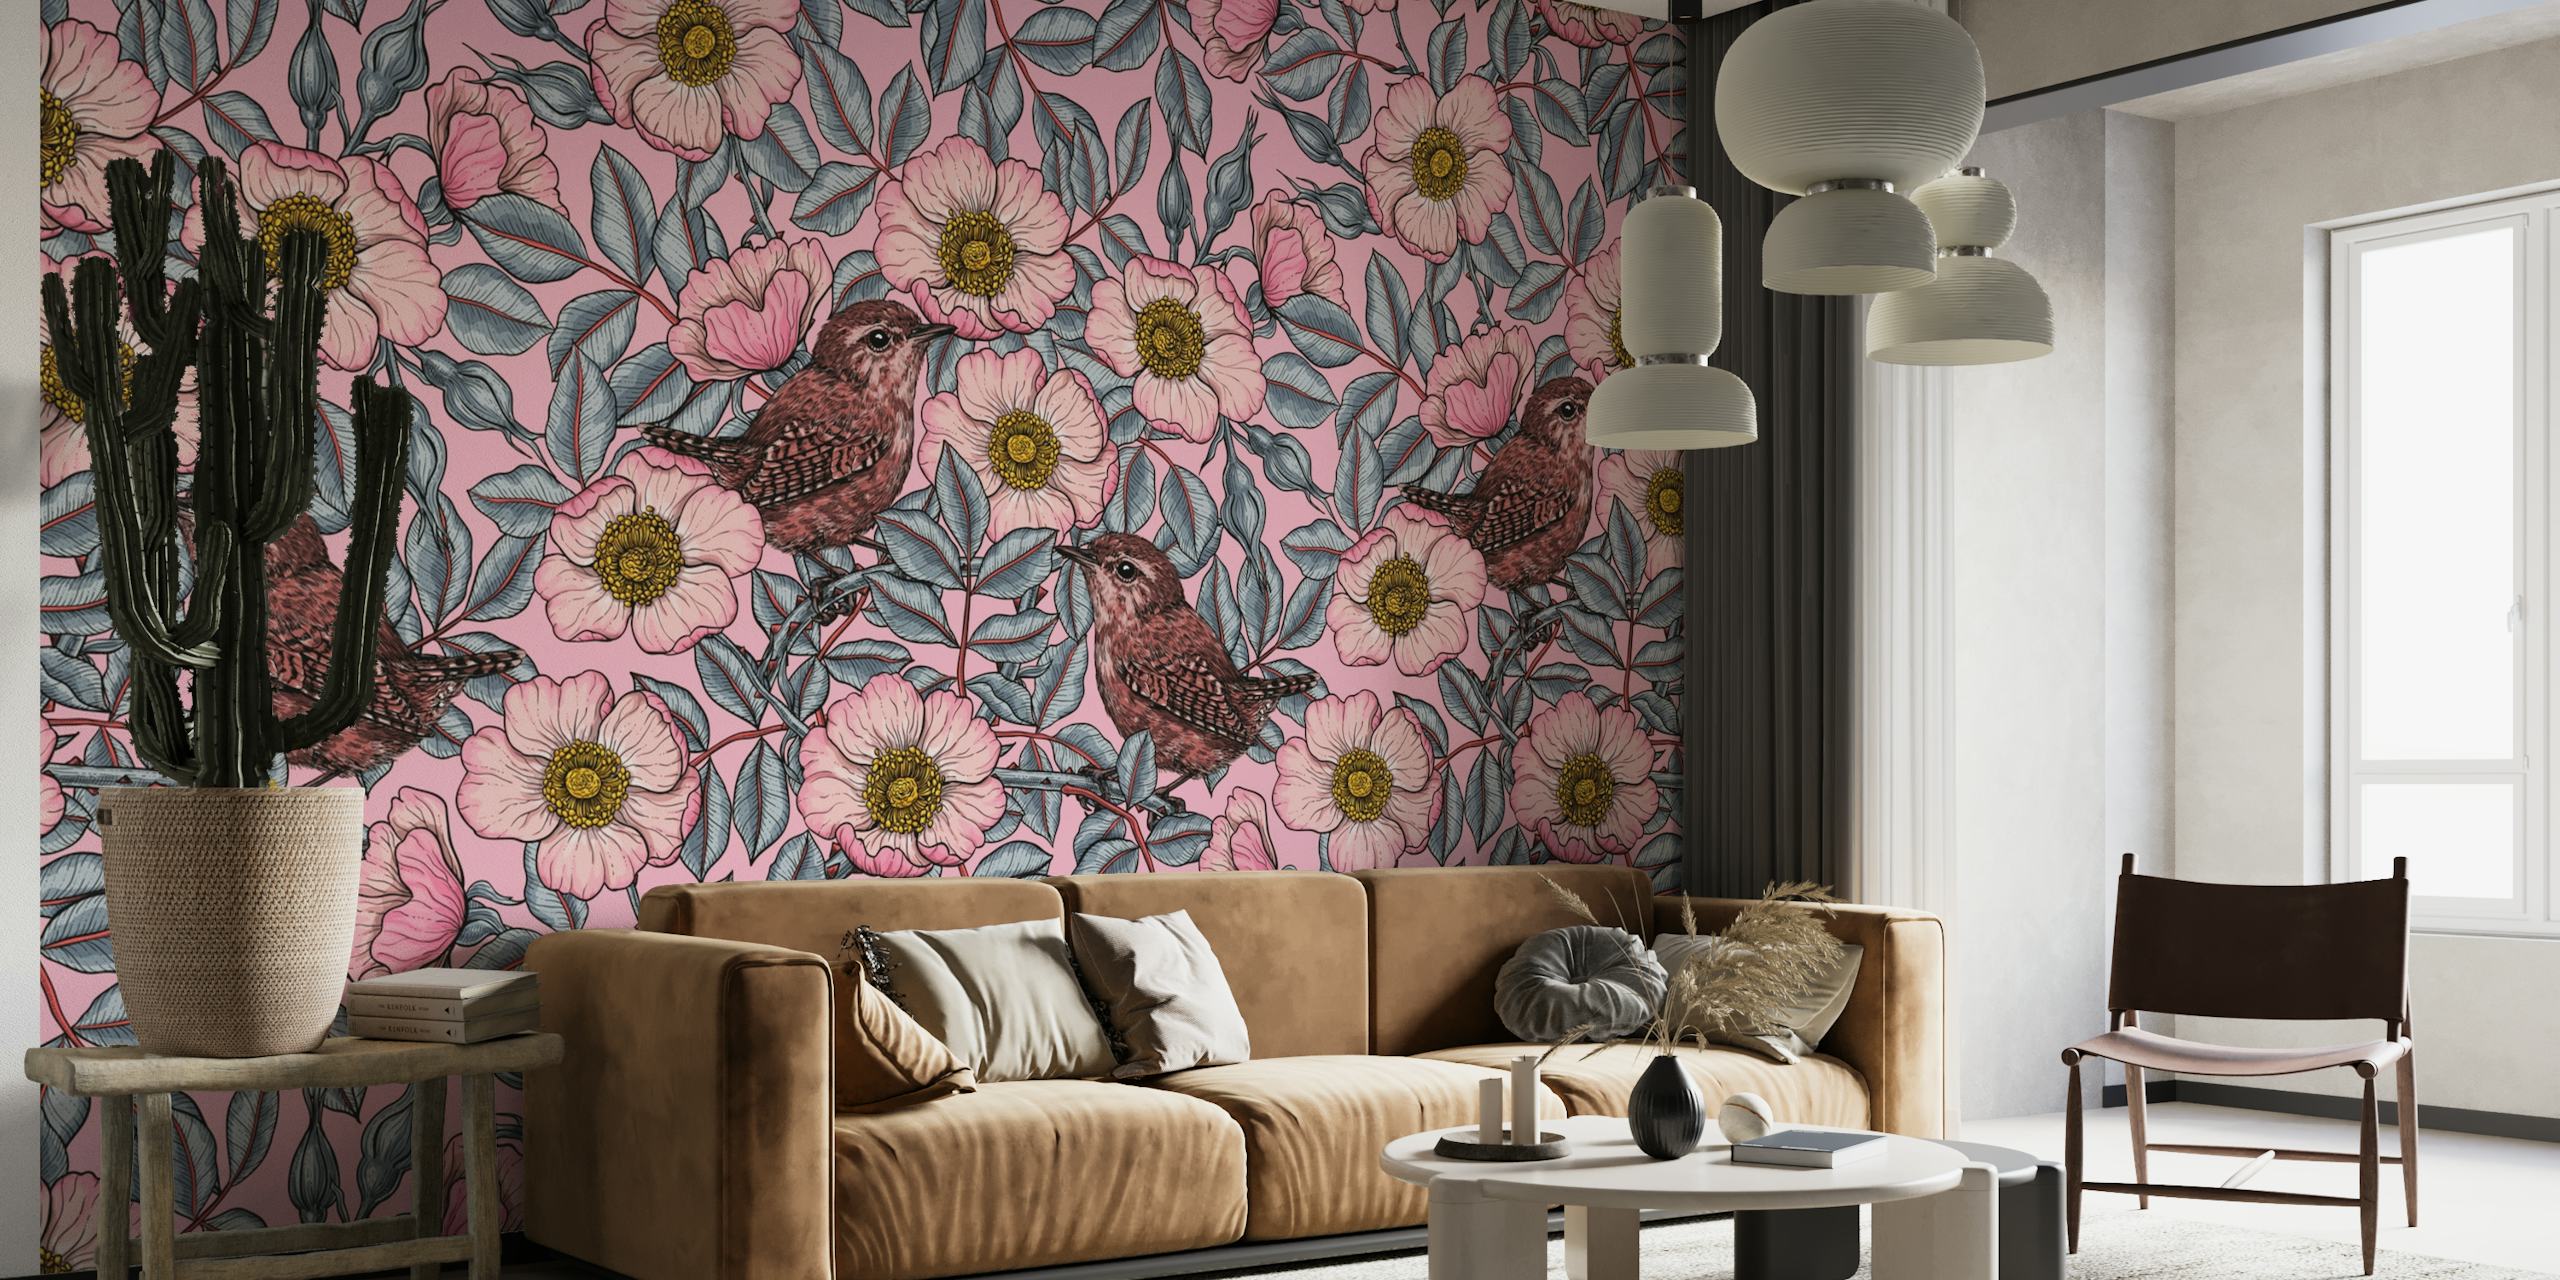 Wall mural of wrens nestled among blooming roses with a vintage-inspired color palette